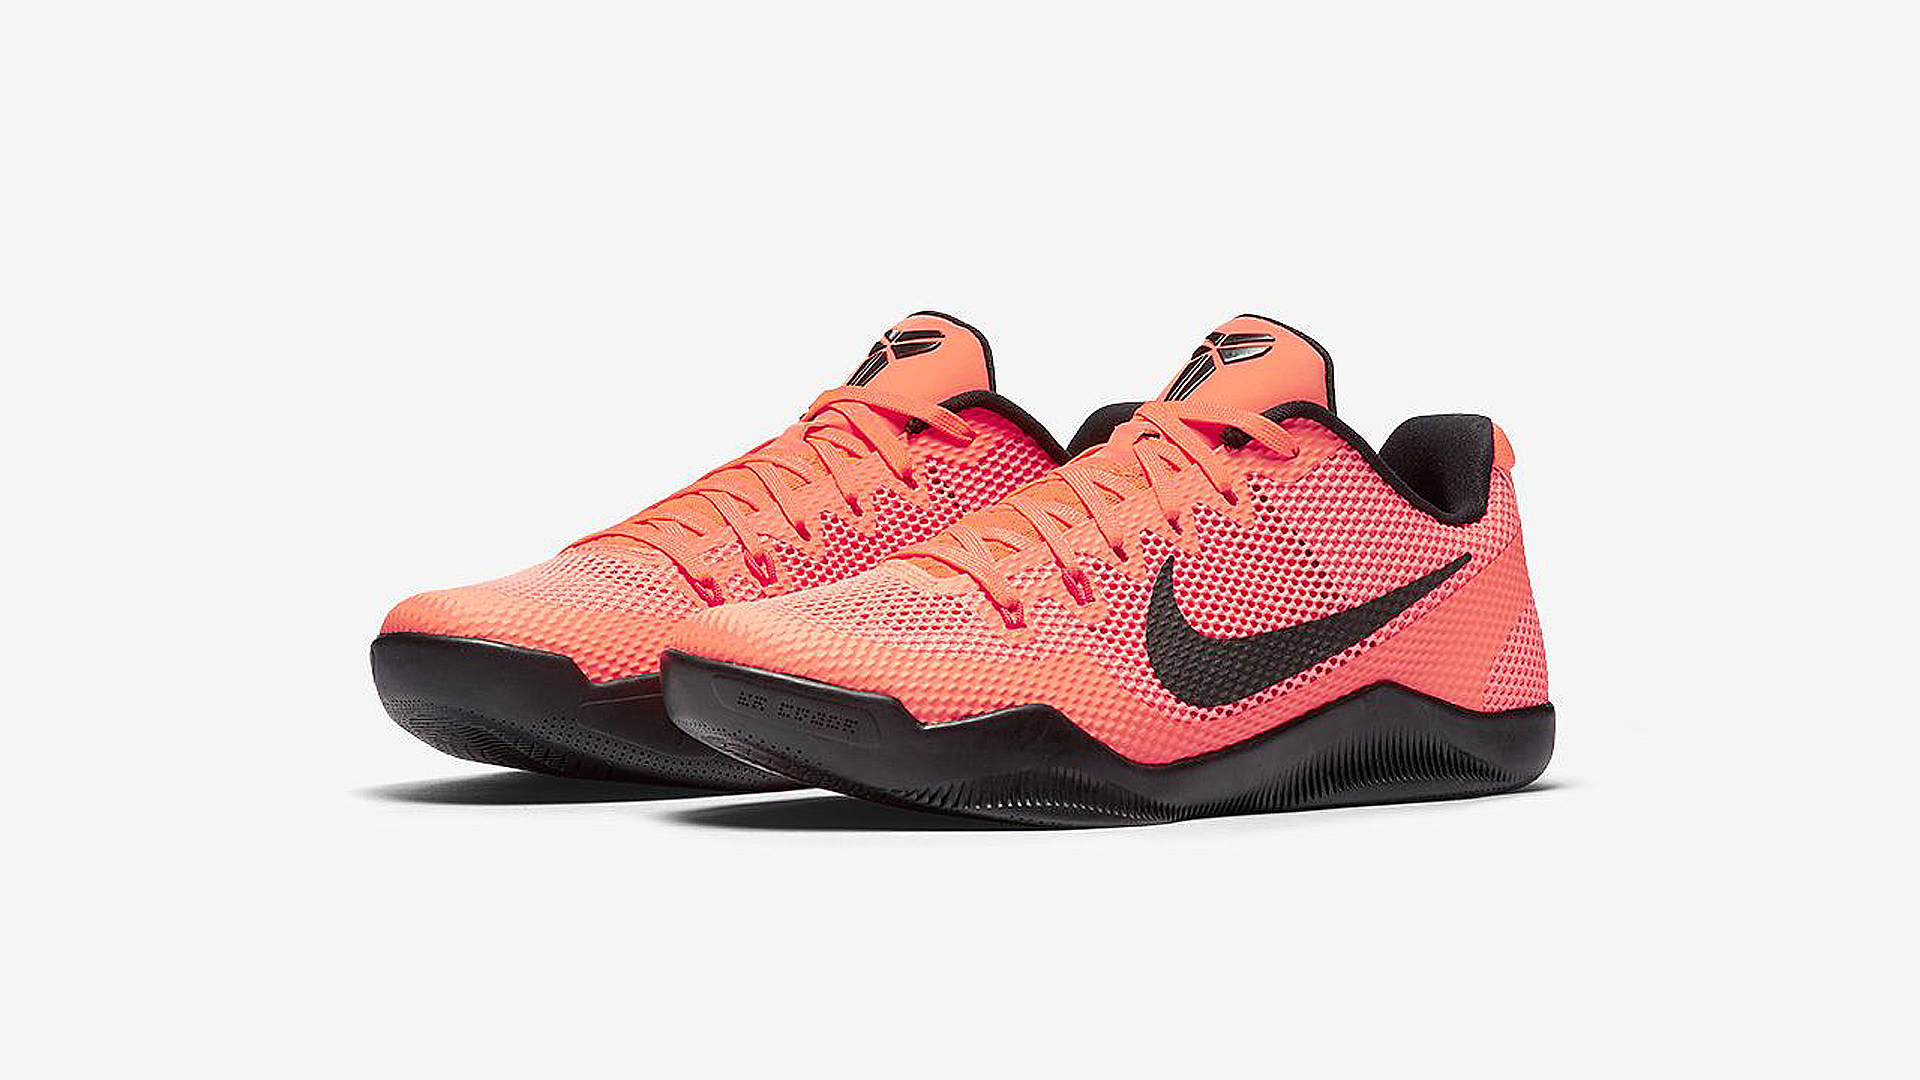 The Nike Kobe Xi Low 'Bright Mango/Bright Crimson' Gets A Release Date -  Weartesters